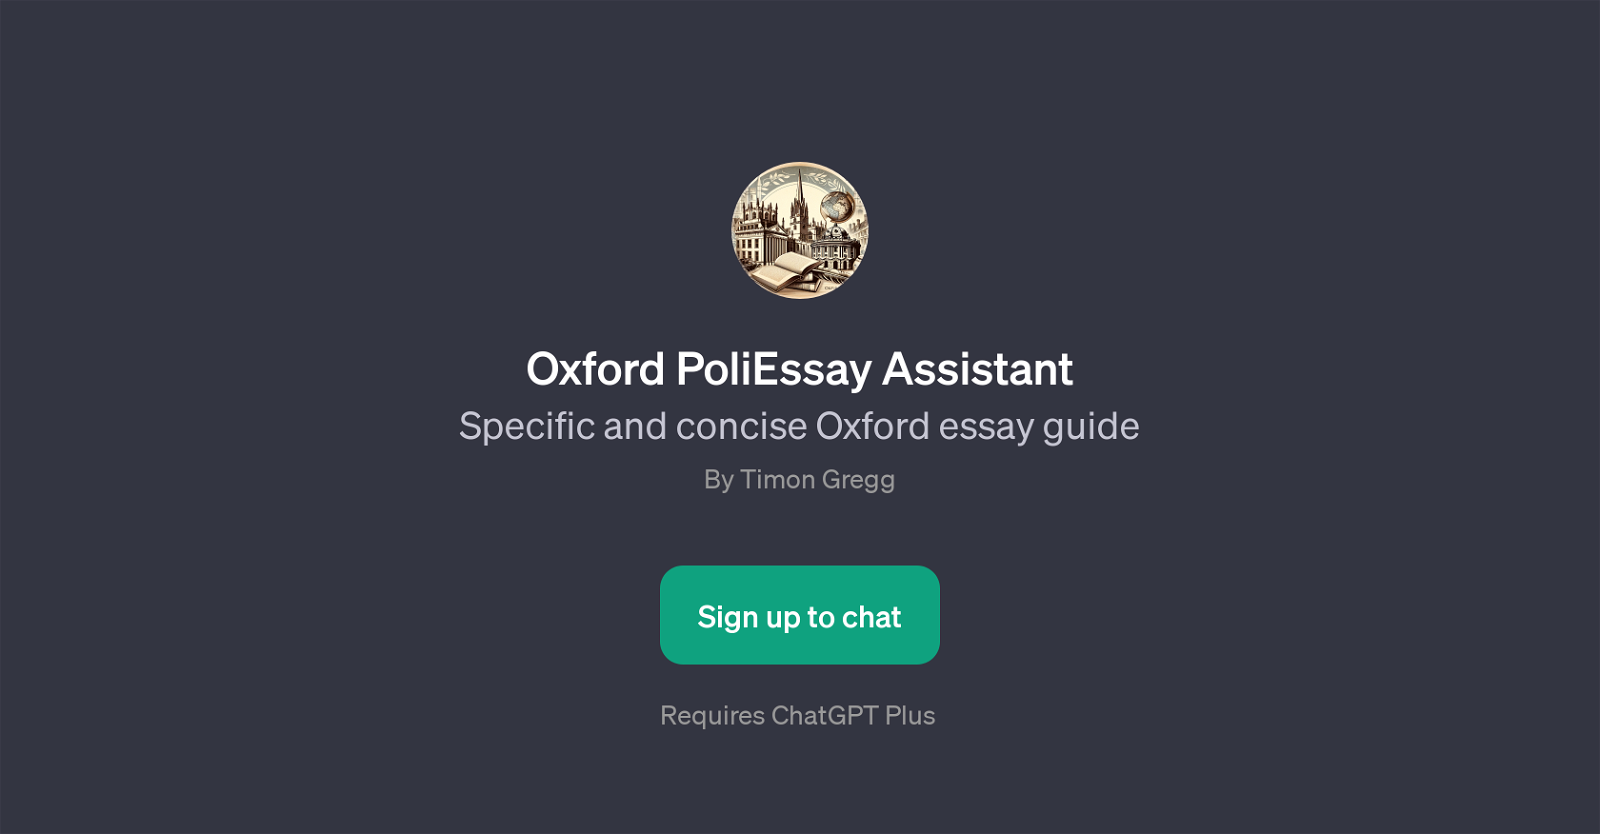 Oxford PoliEssay Assistant website